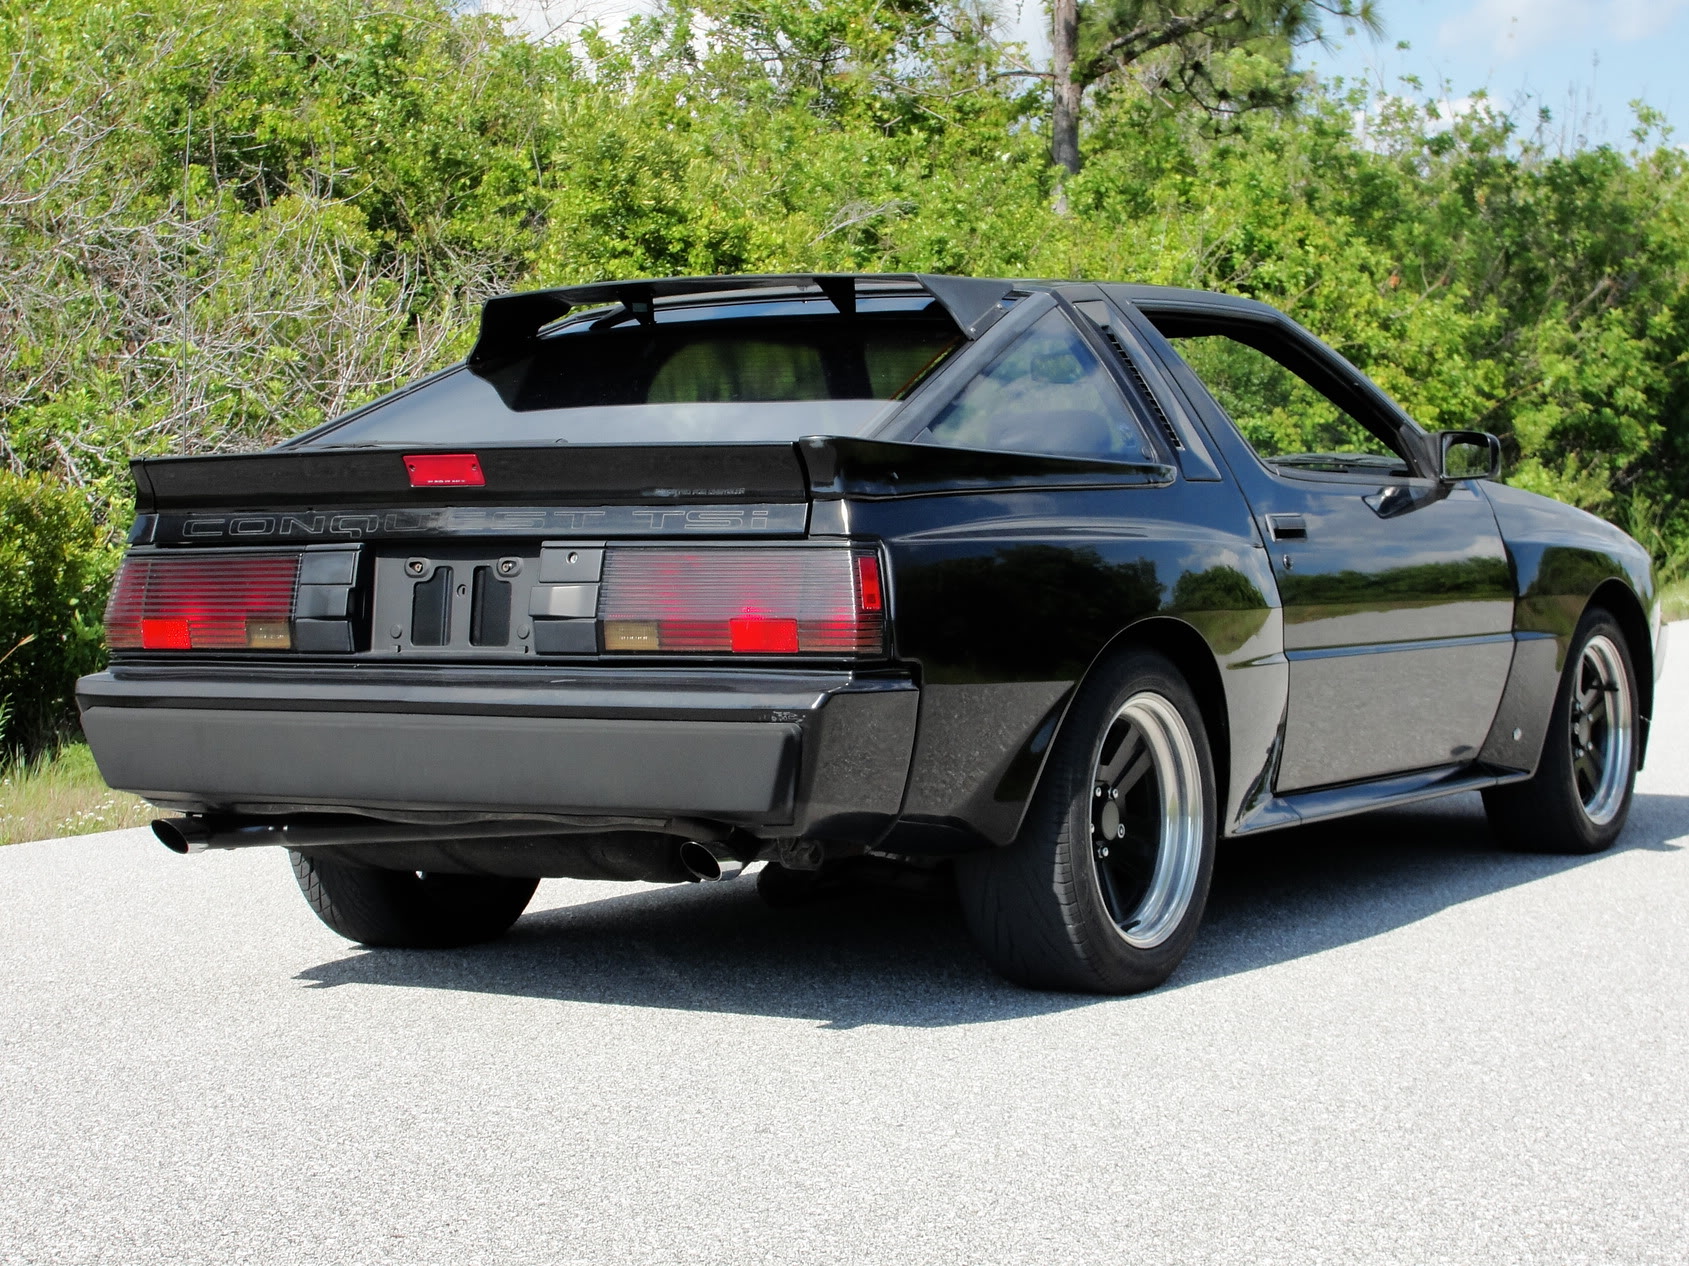 Plymouth Conquest 1986 #3